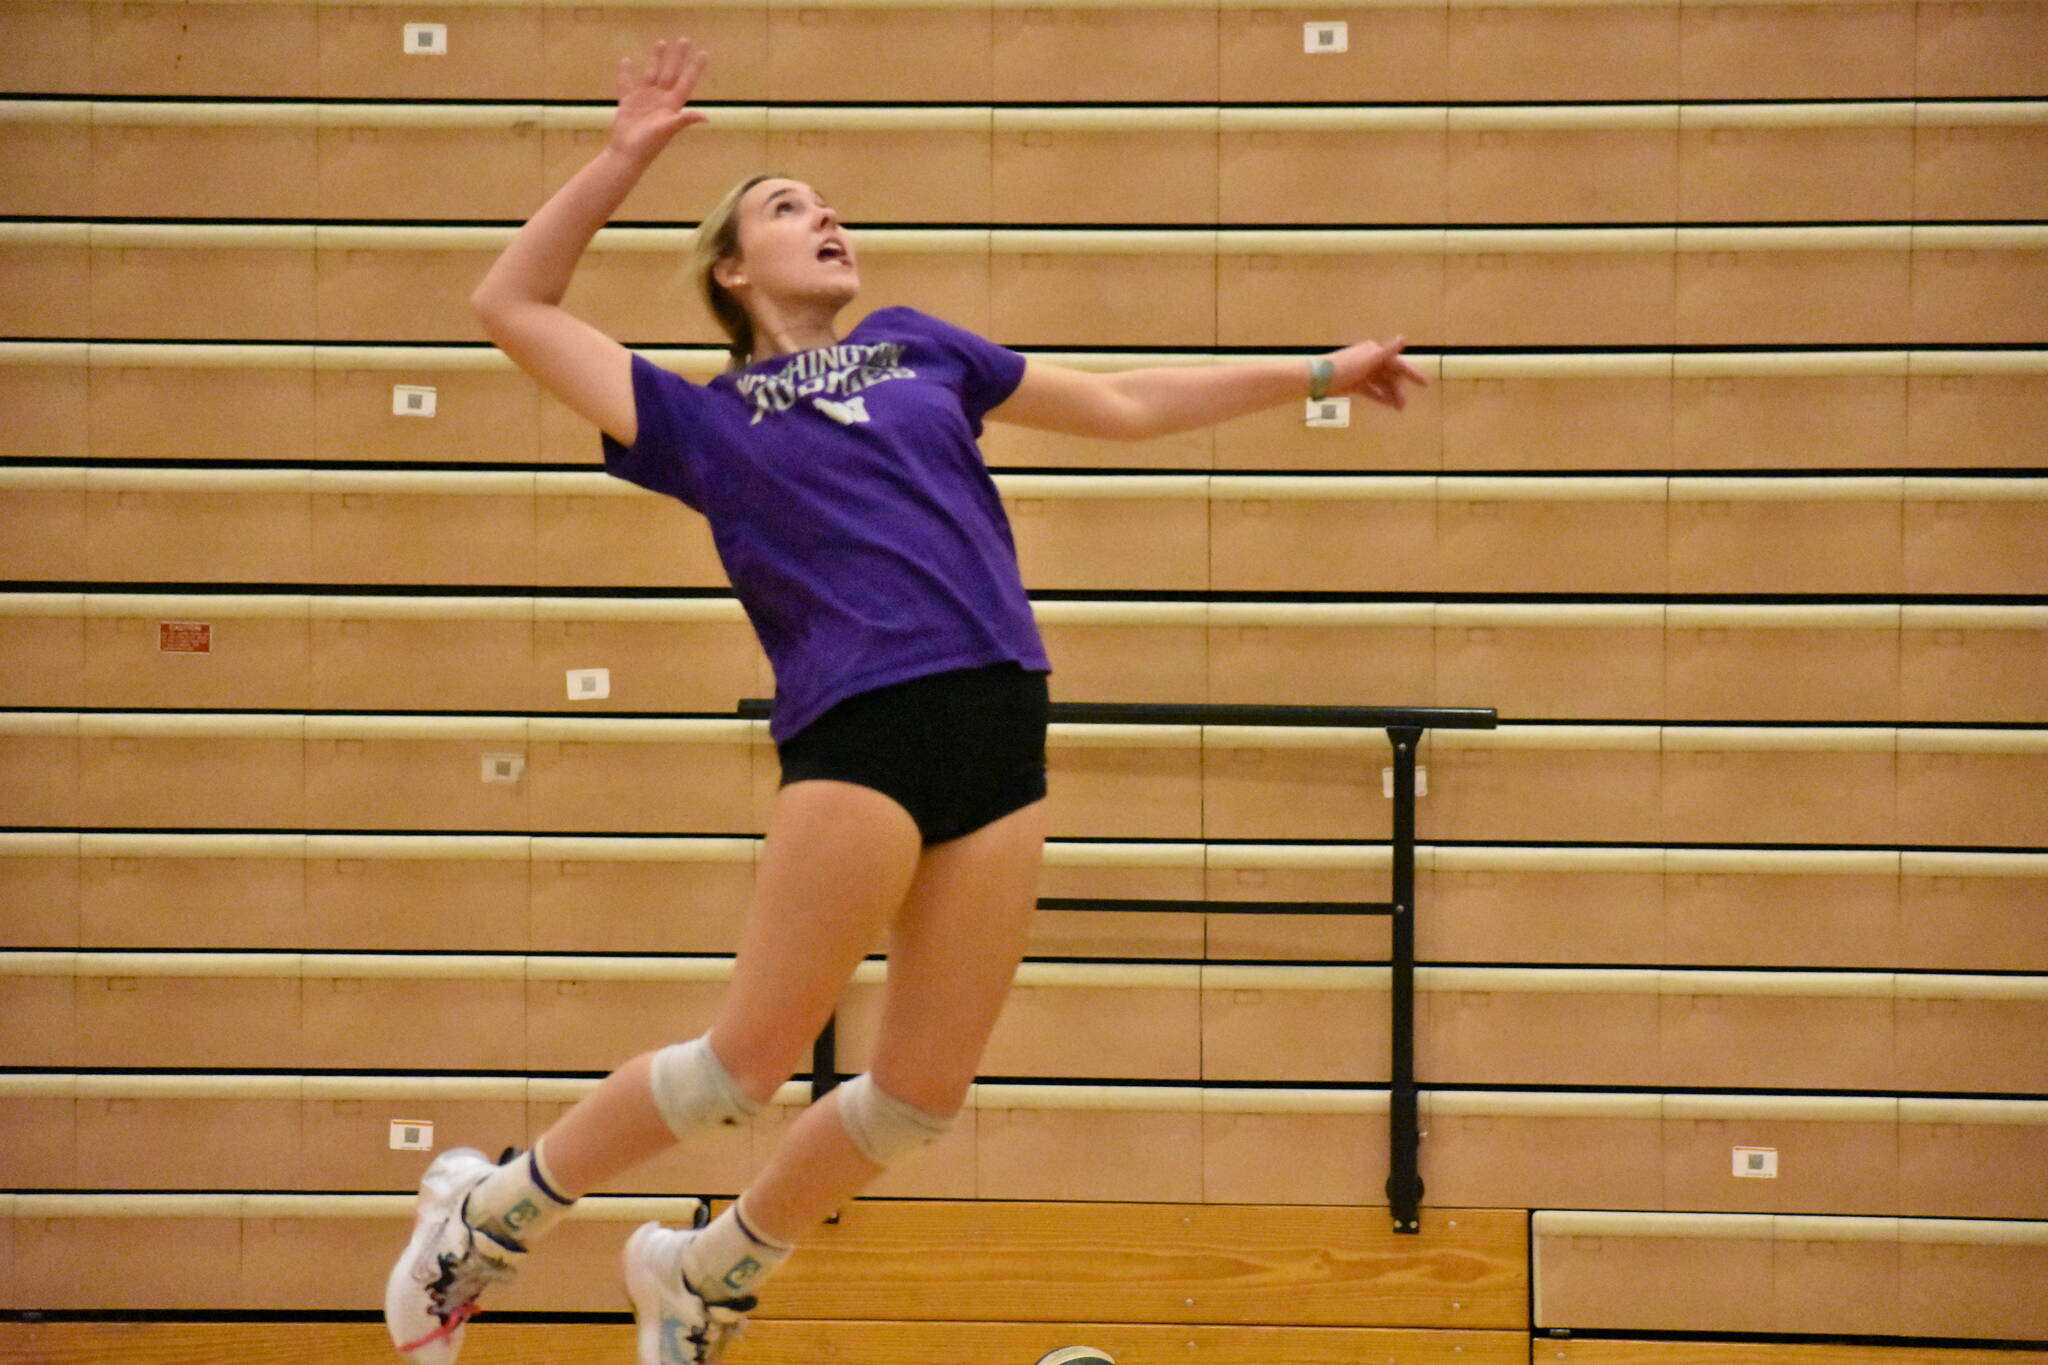 Booth goes up for a kill in practice before the Spartans matchup with Oympia. Ben Ray / The Reporter